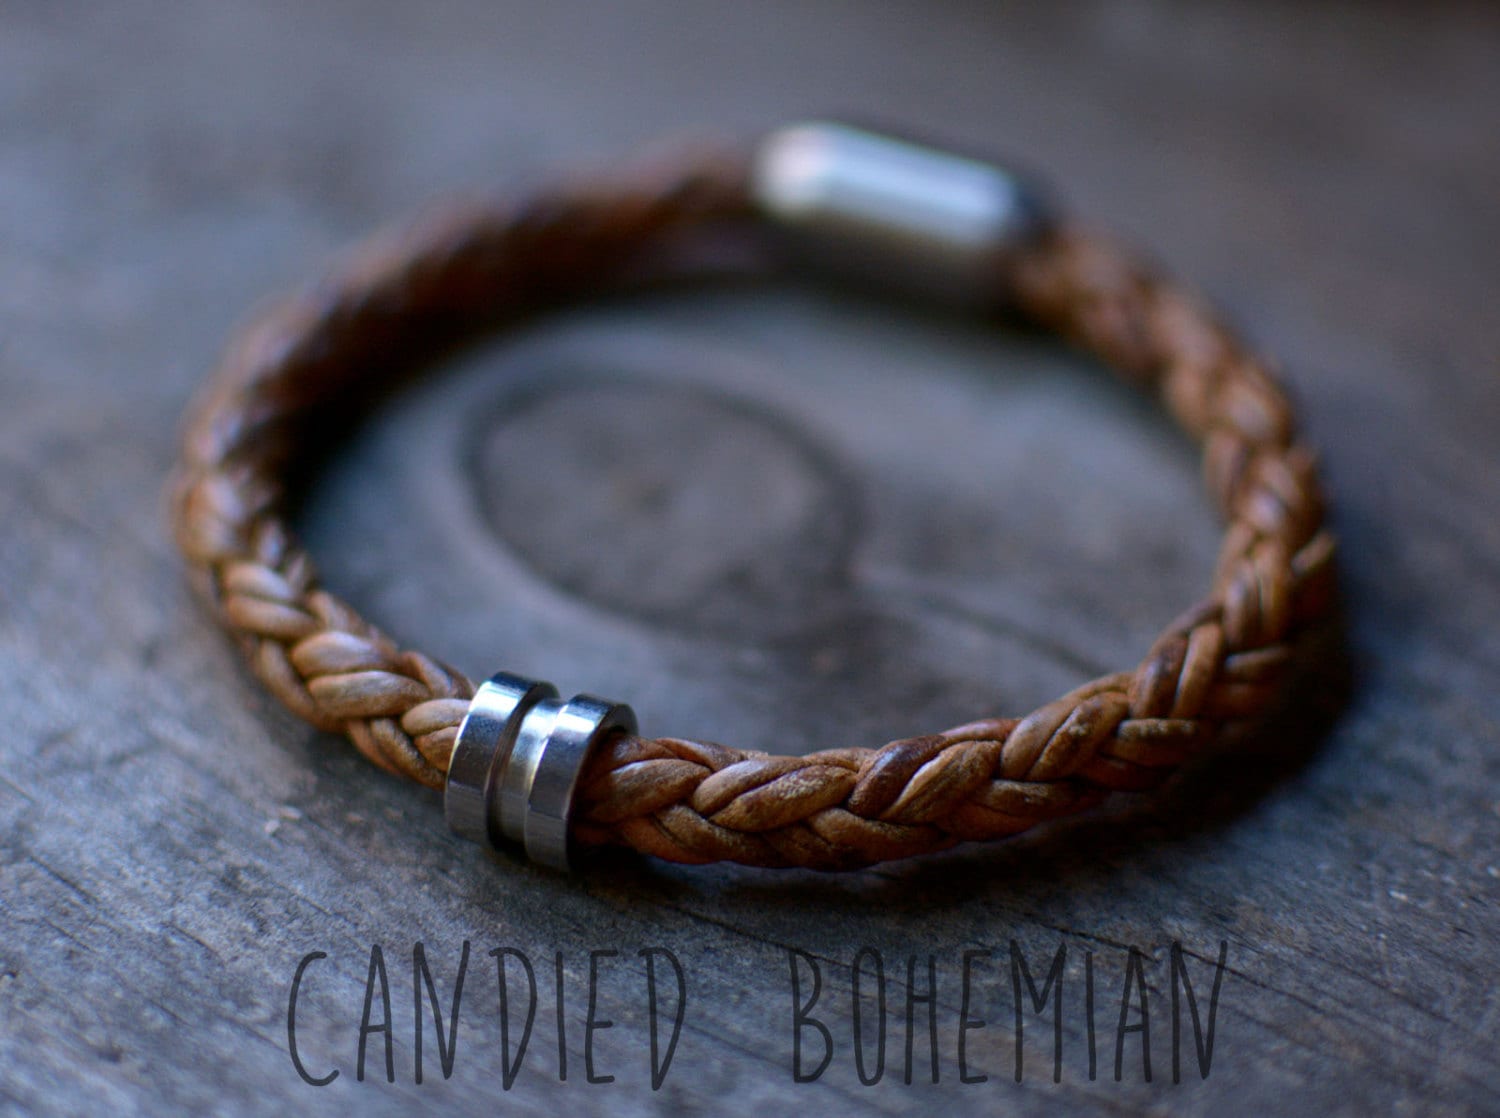 CATCH THE BULLET Mens Leather Bracelet Braided Leather